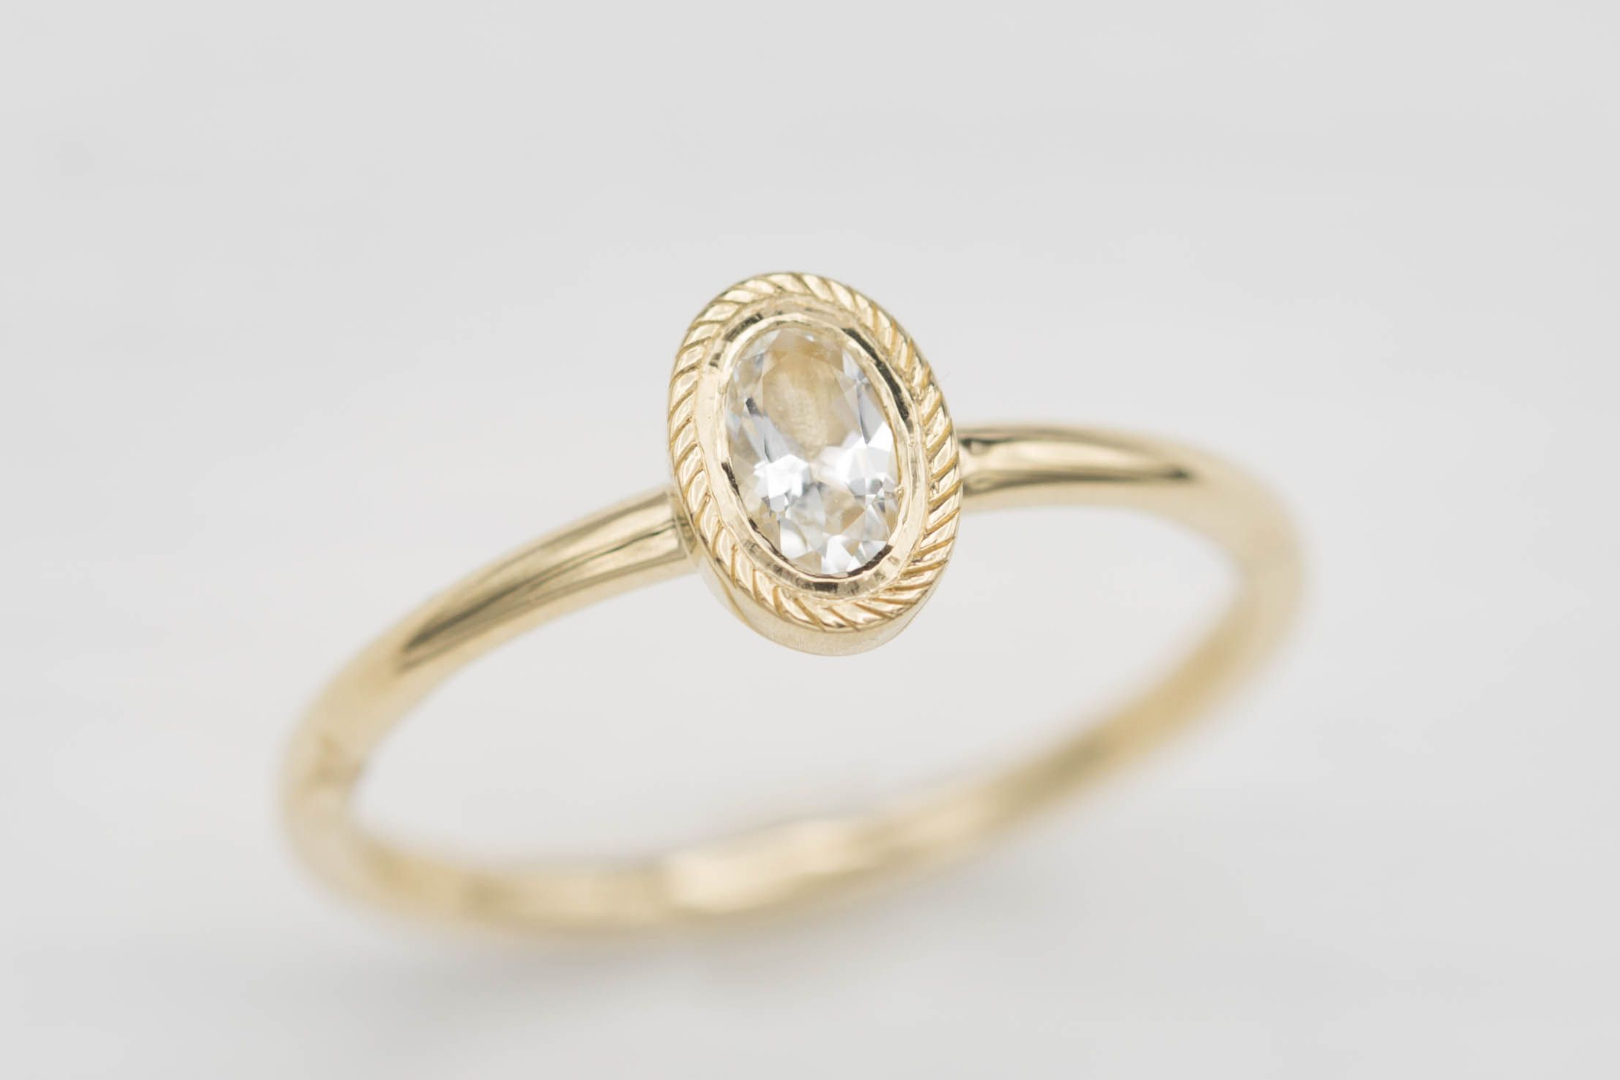 Oval white topaz in a delicate yellow gold bezel setting